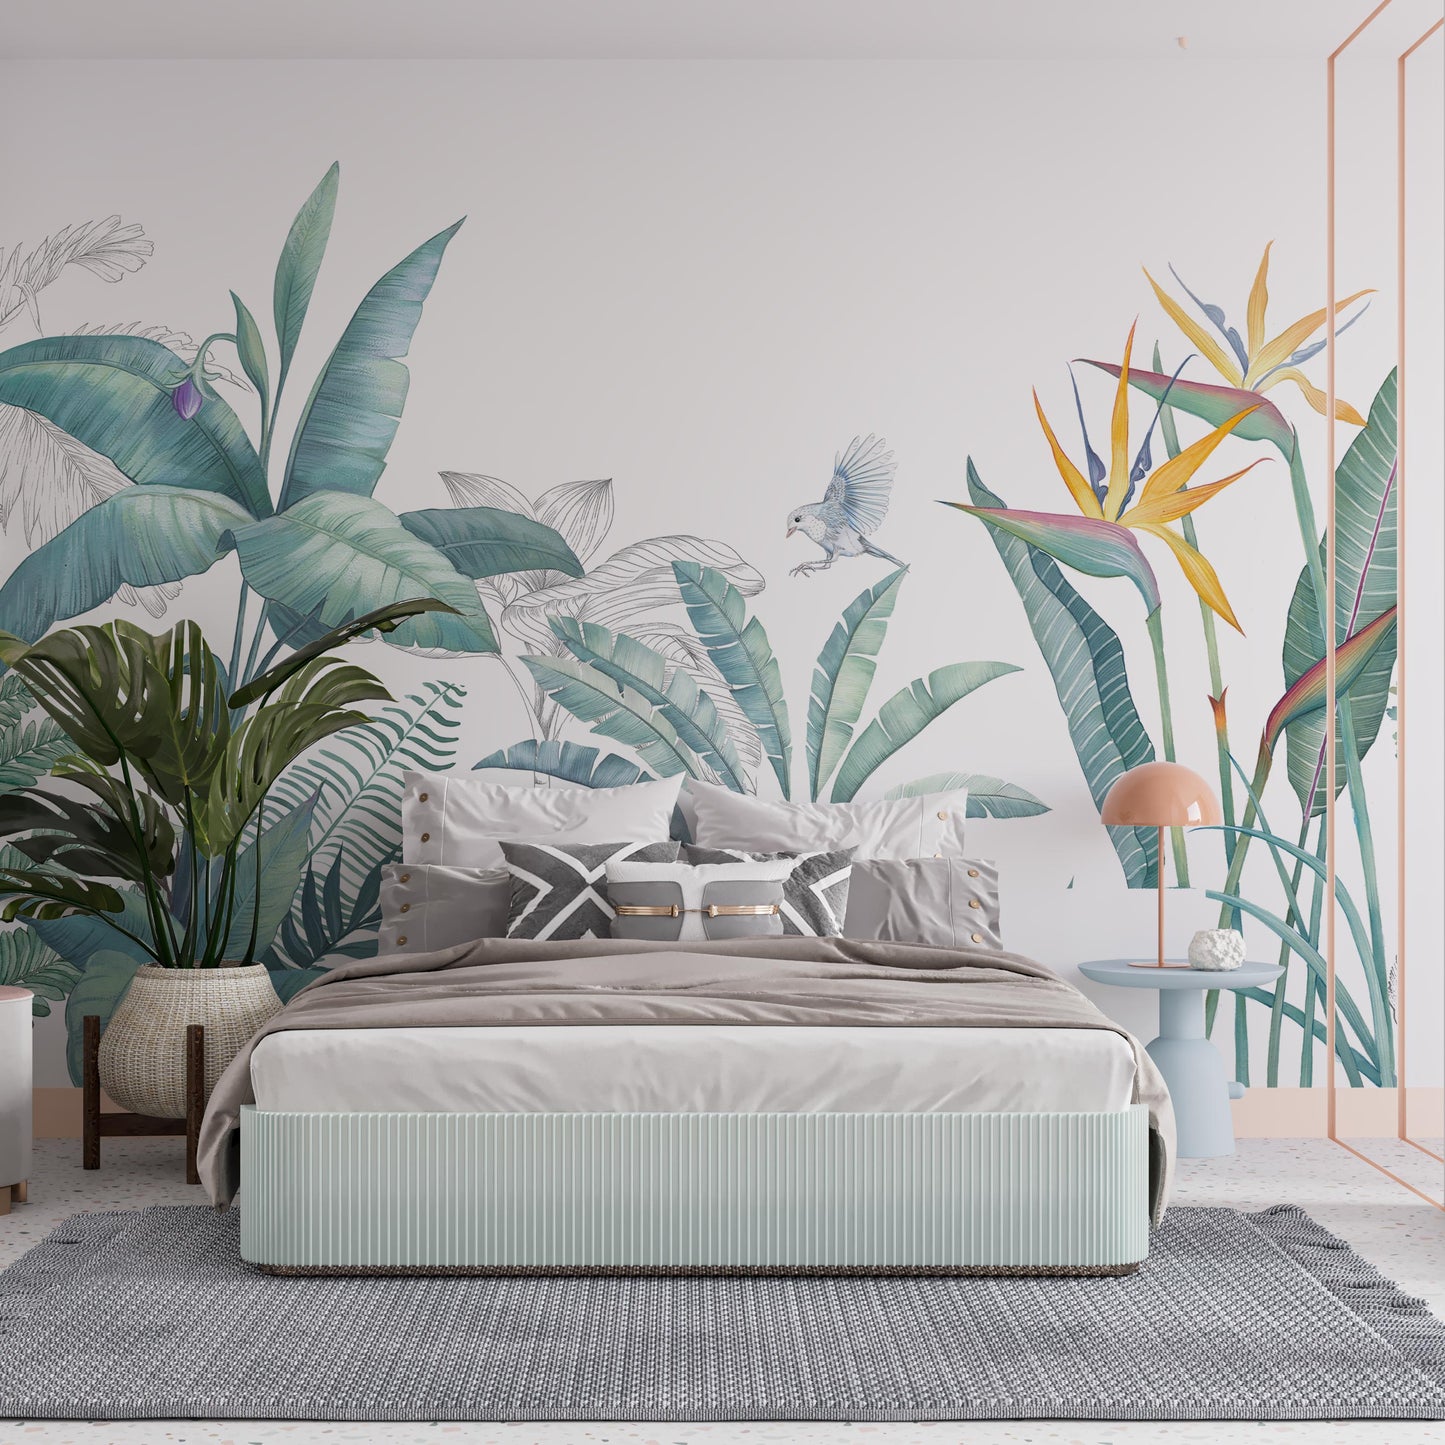 Pastel-colored bedroom with mid-century modern style and botanical wallpaper mural